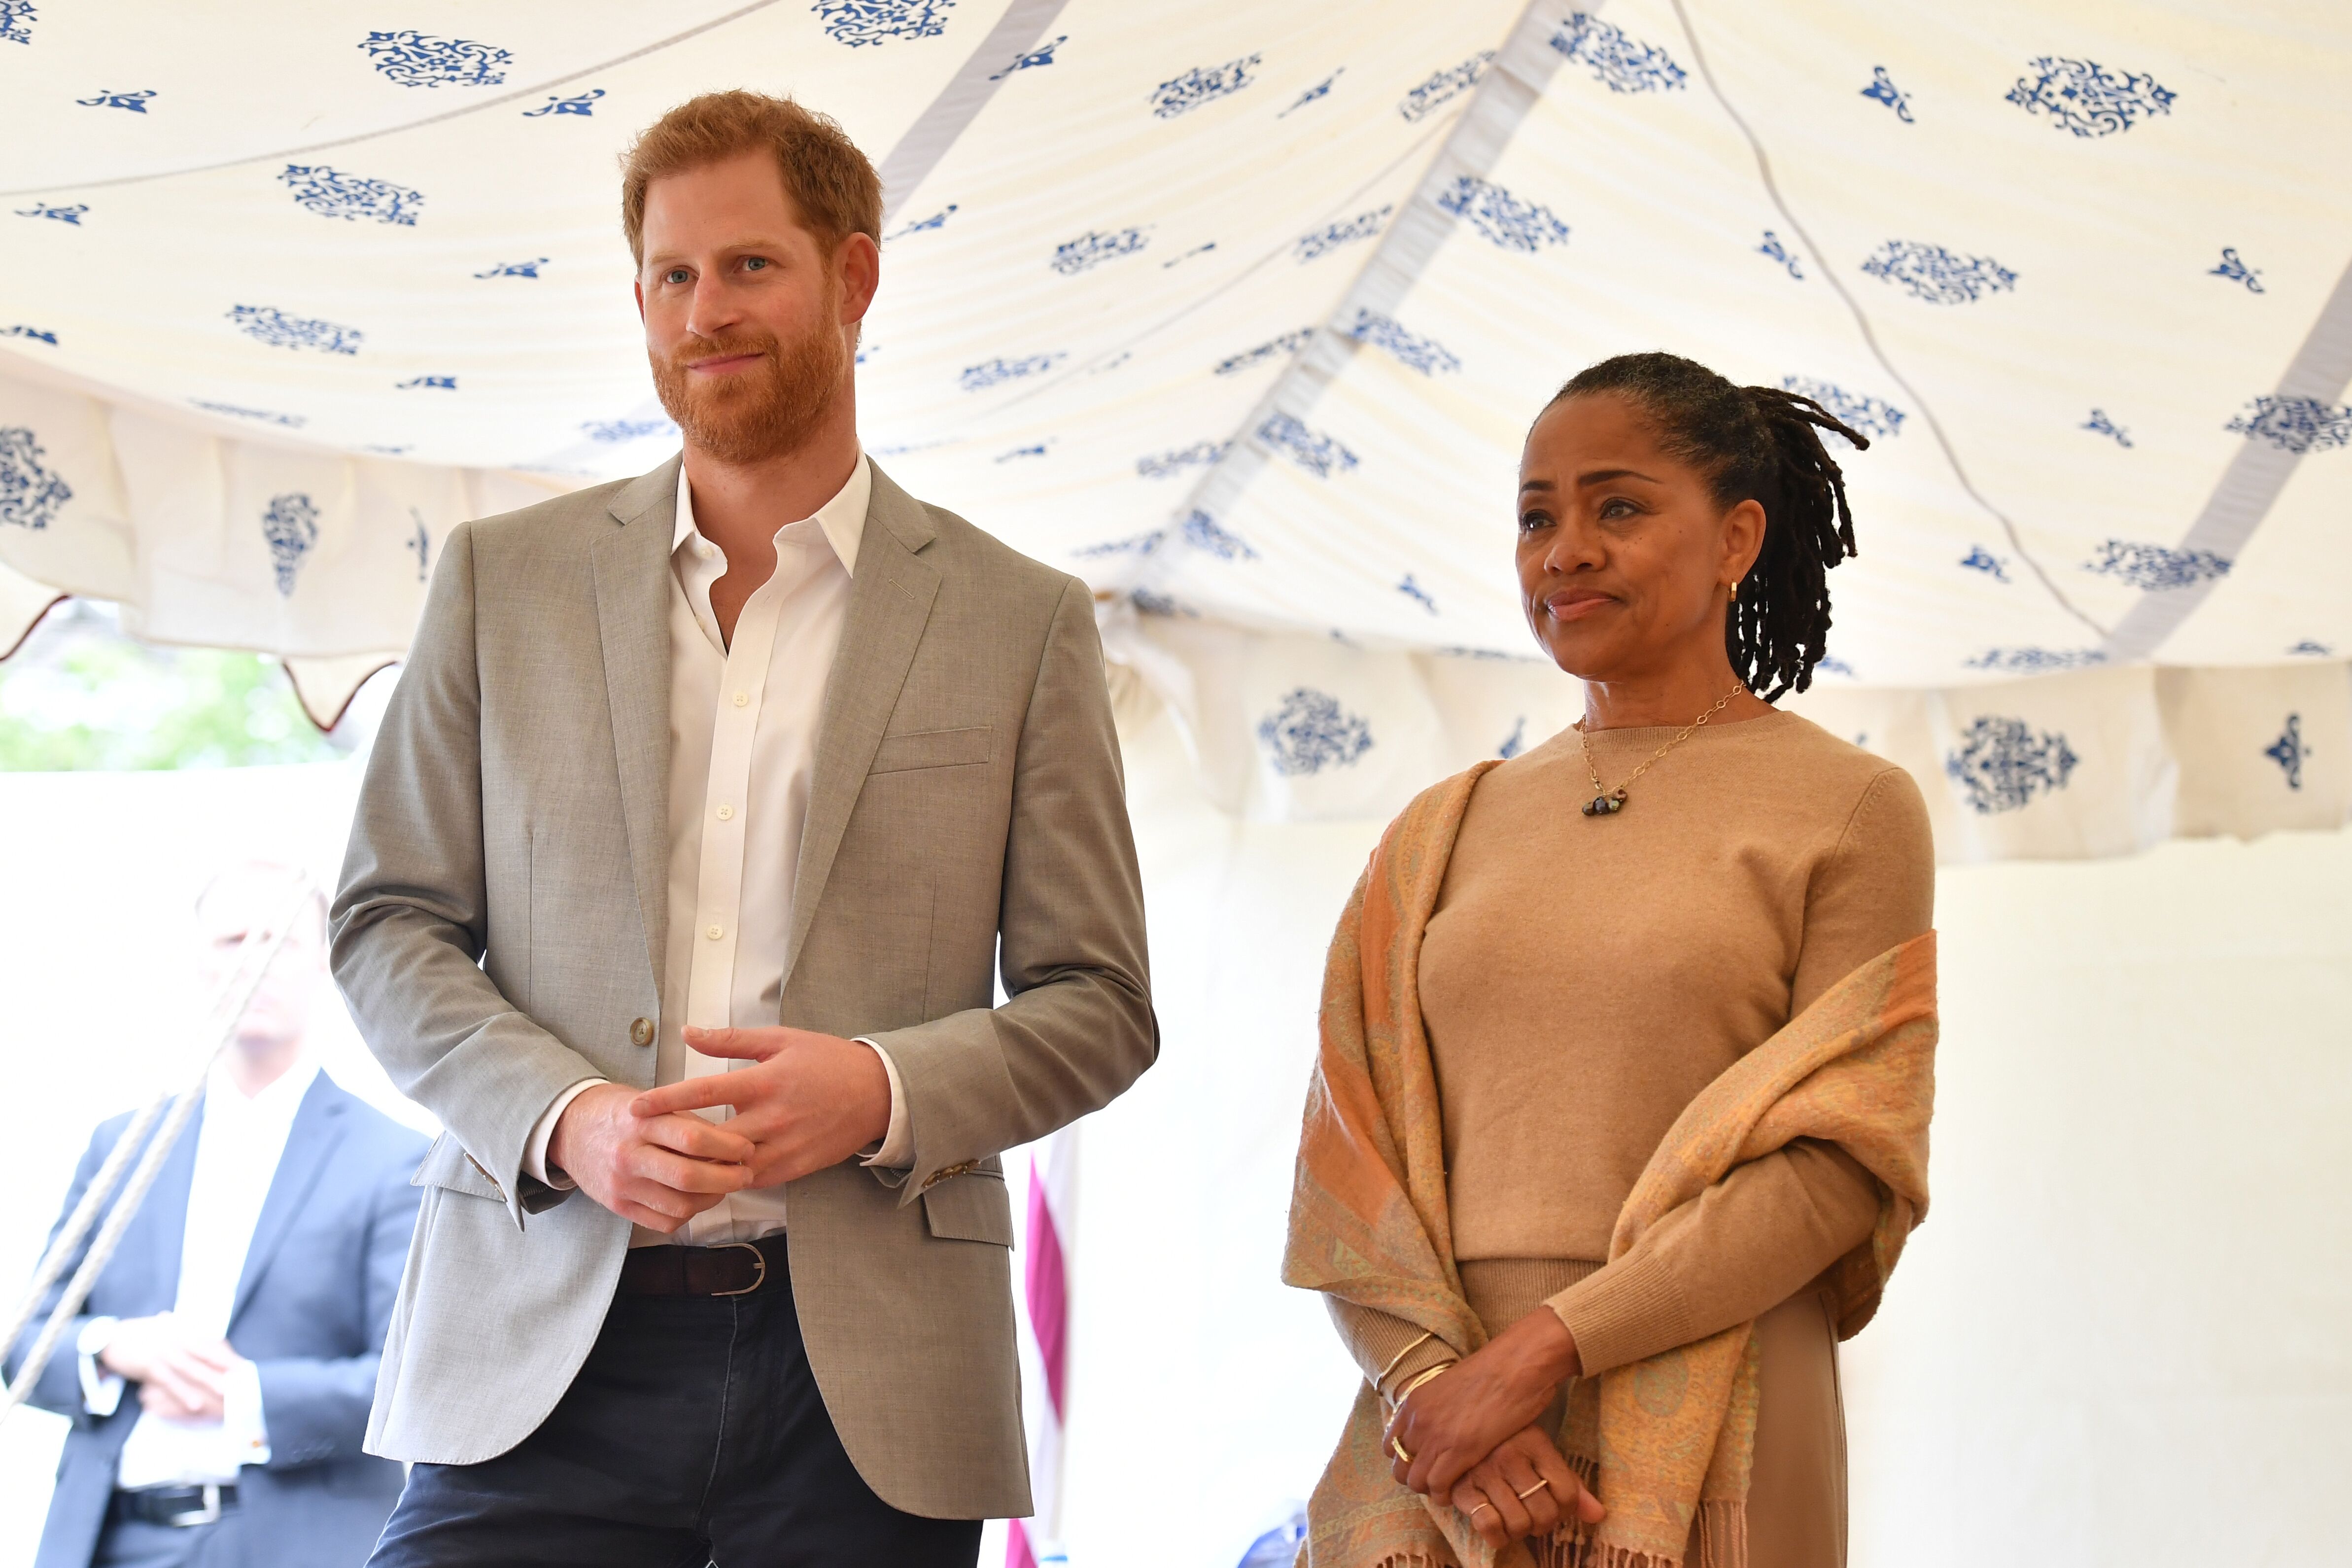 Prince Harry, Duke of Sussex and Doria Ragland listen to Meghan, Duchess of Sussex speaking at an event to mark the launch of a cookbook with recipes from a group of women affected by the Grenfell Tower fire at Kensington Palace on September 20, 2018 in London, England | Photo: Getty Images